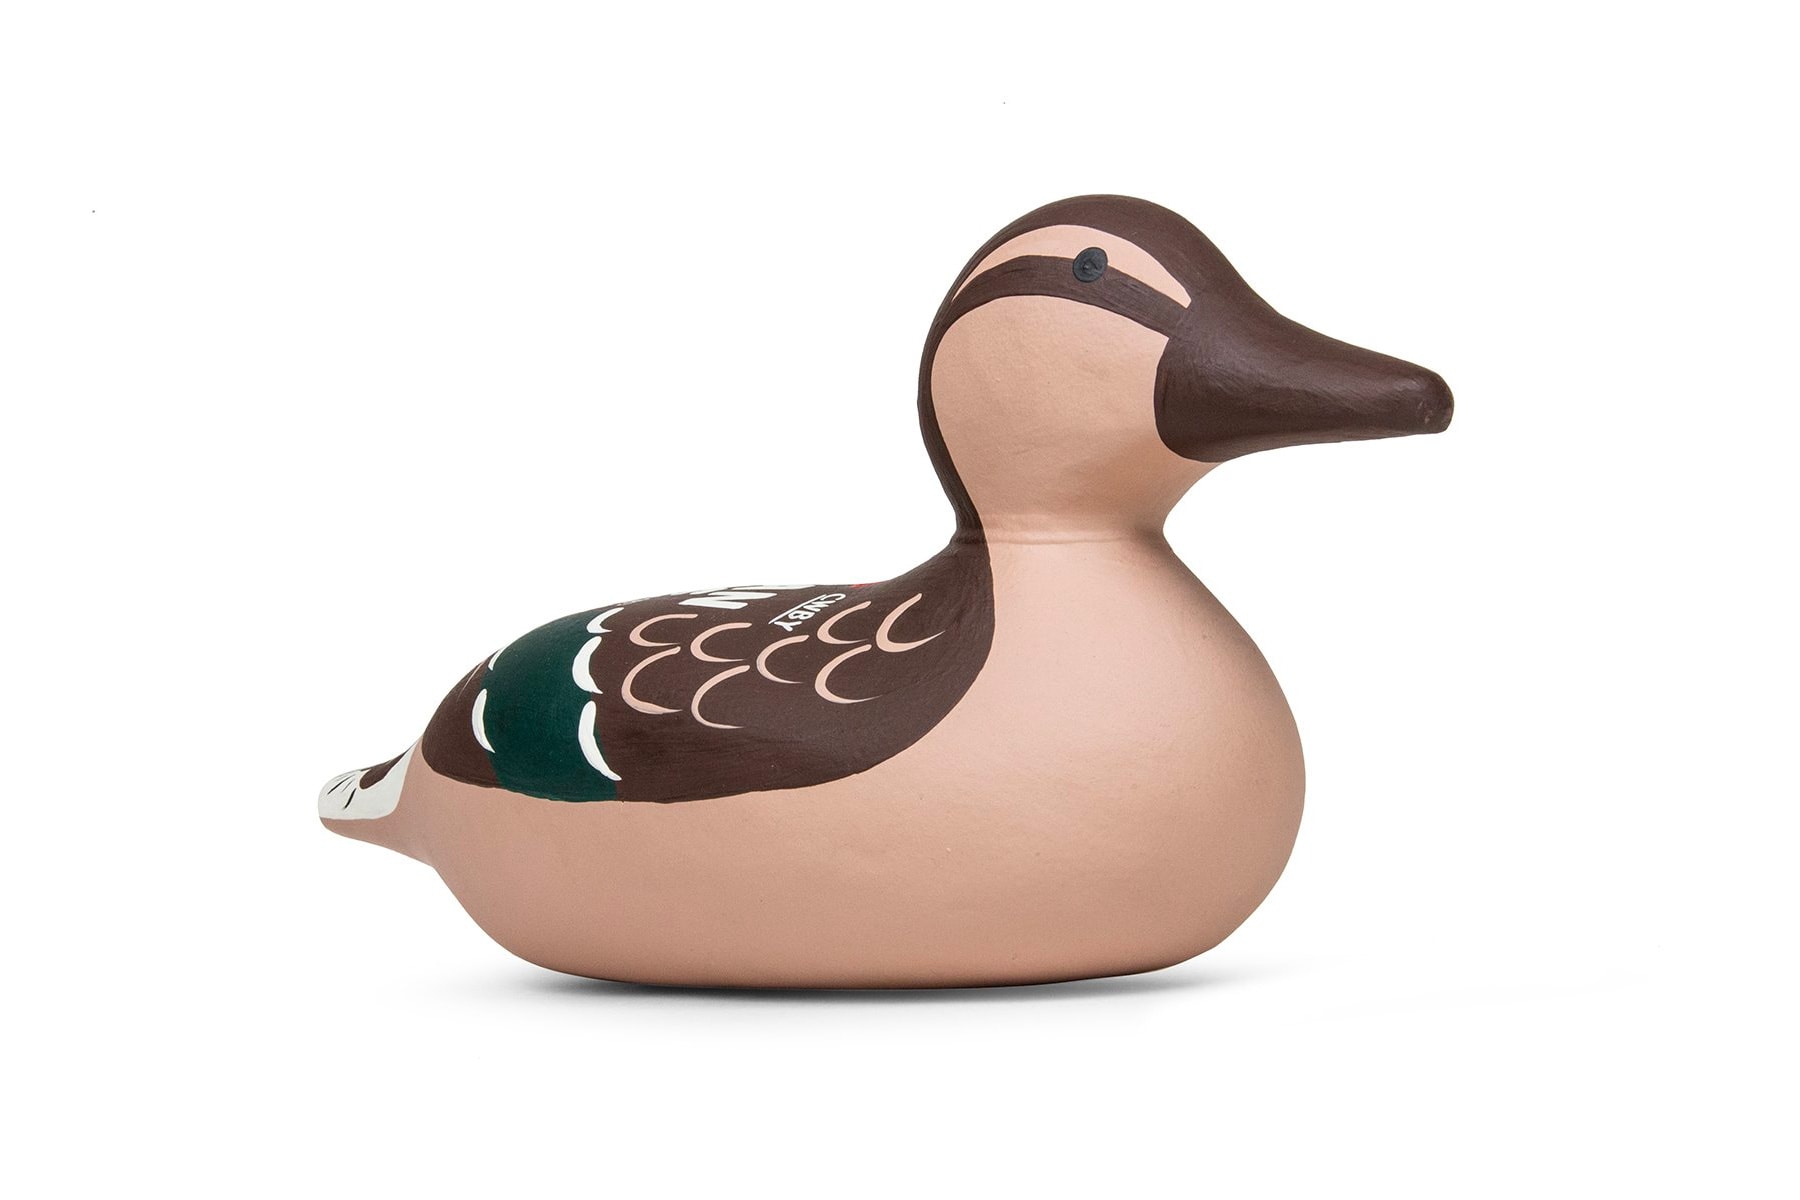 HUMAN MADE Paper Mache Duck Display Brown home accessory decor sculpture